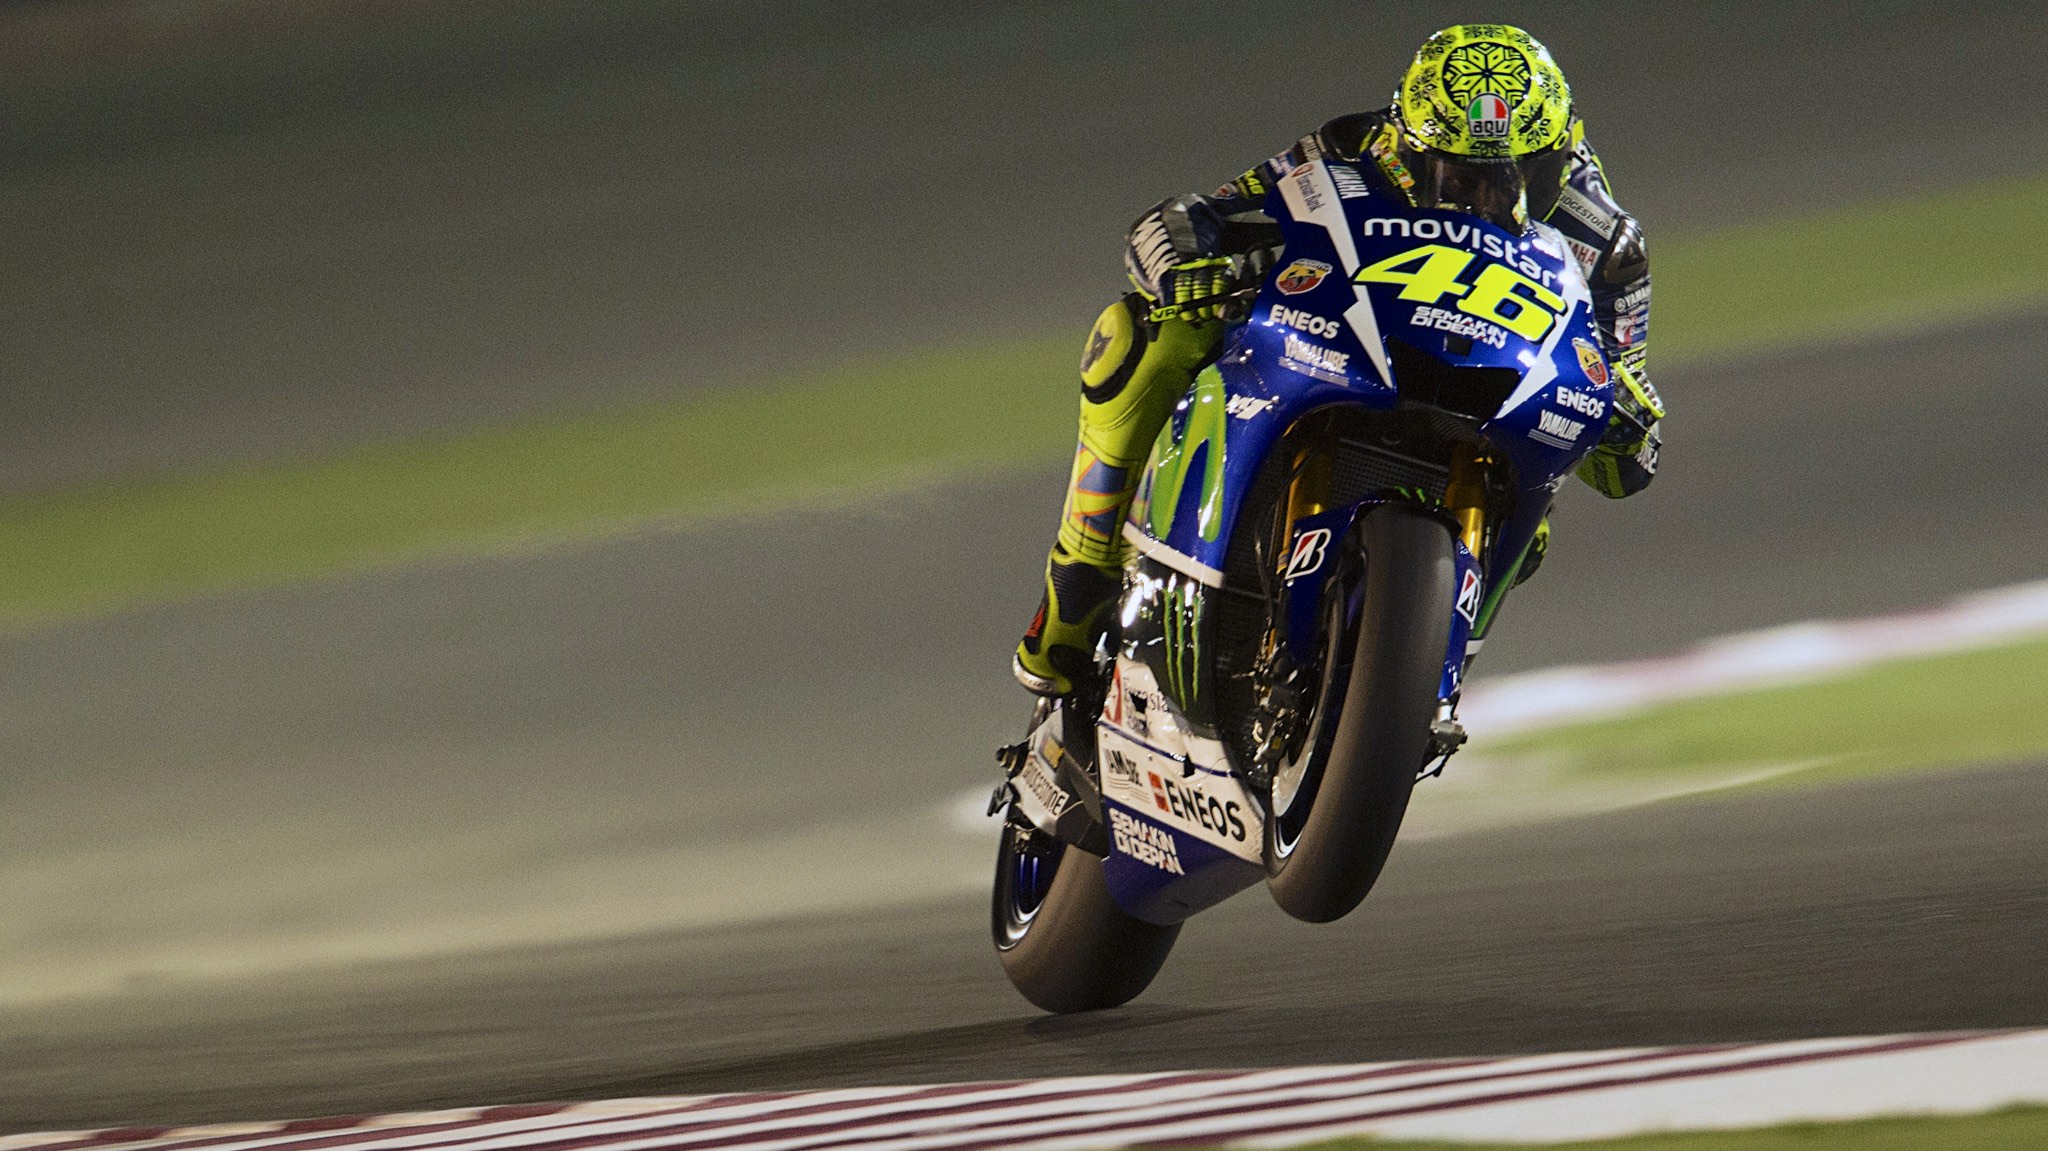 Italy's Own Valentino Rossi